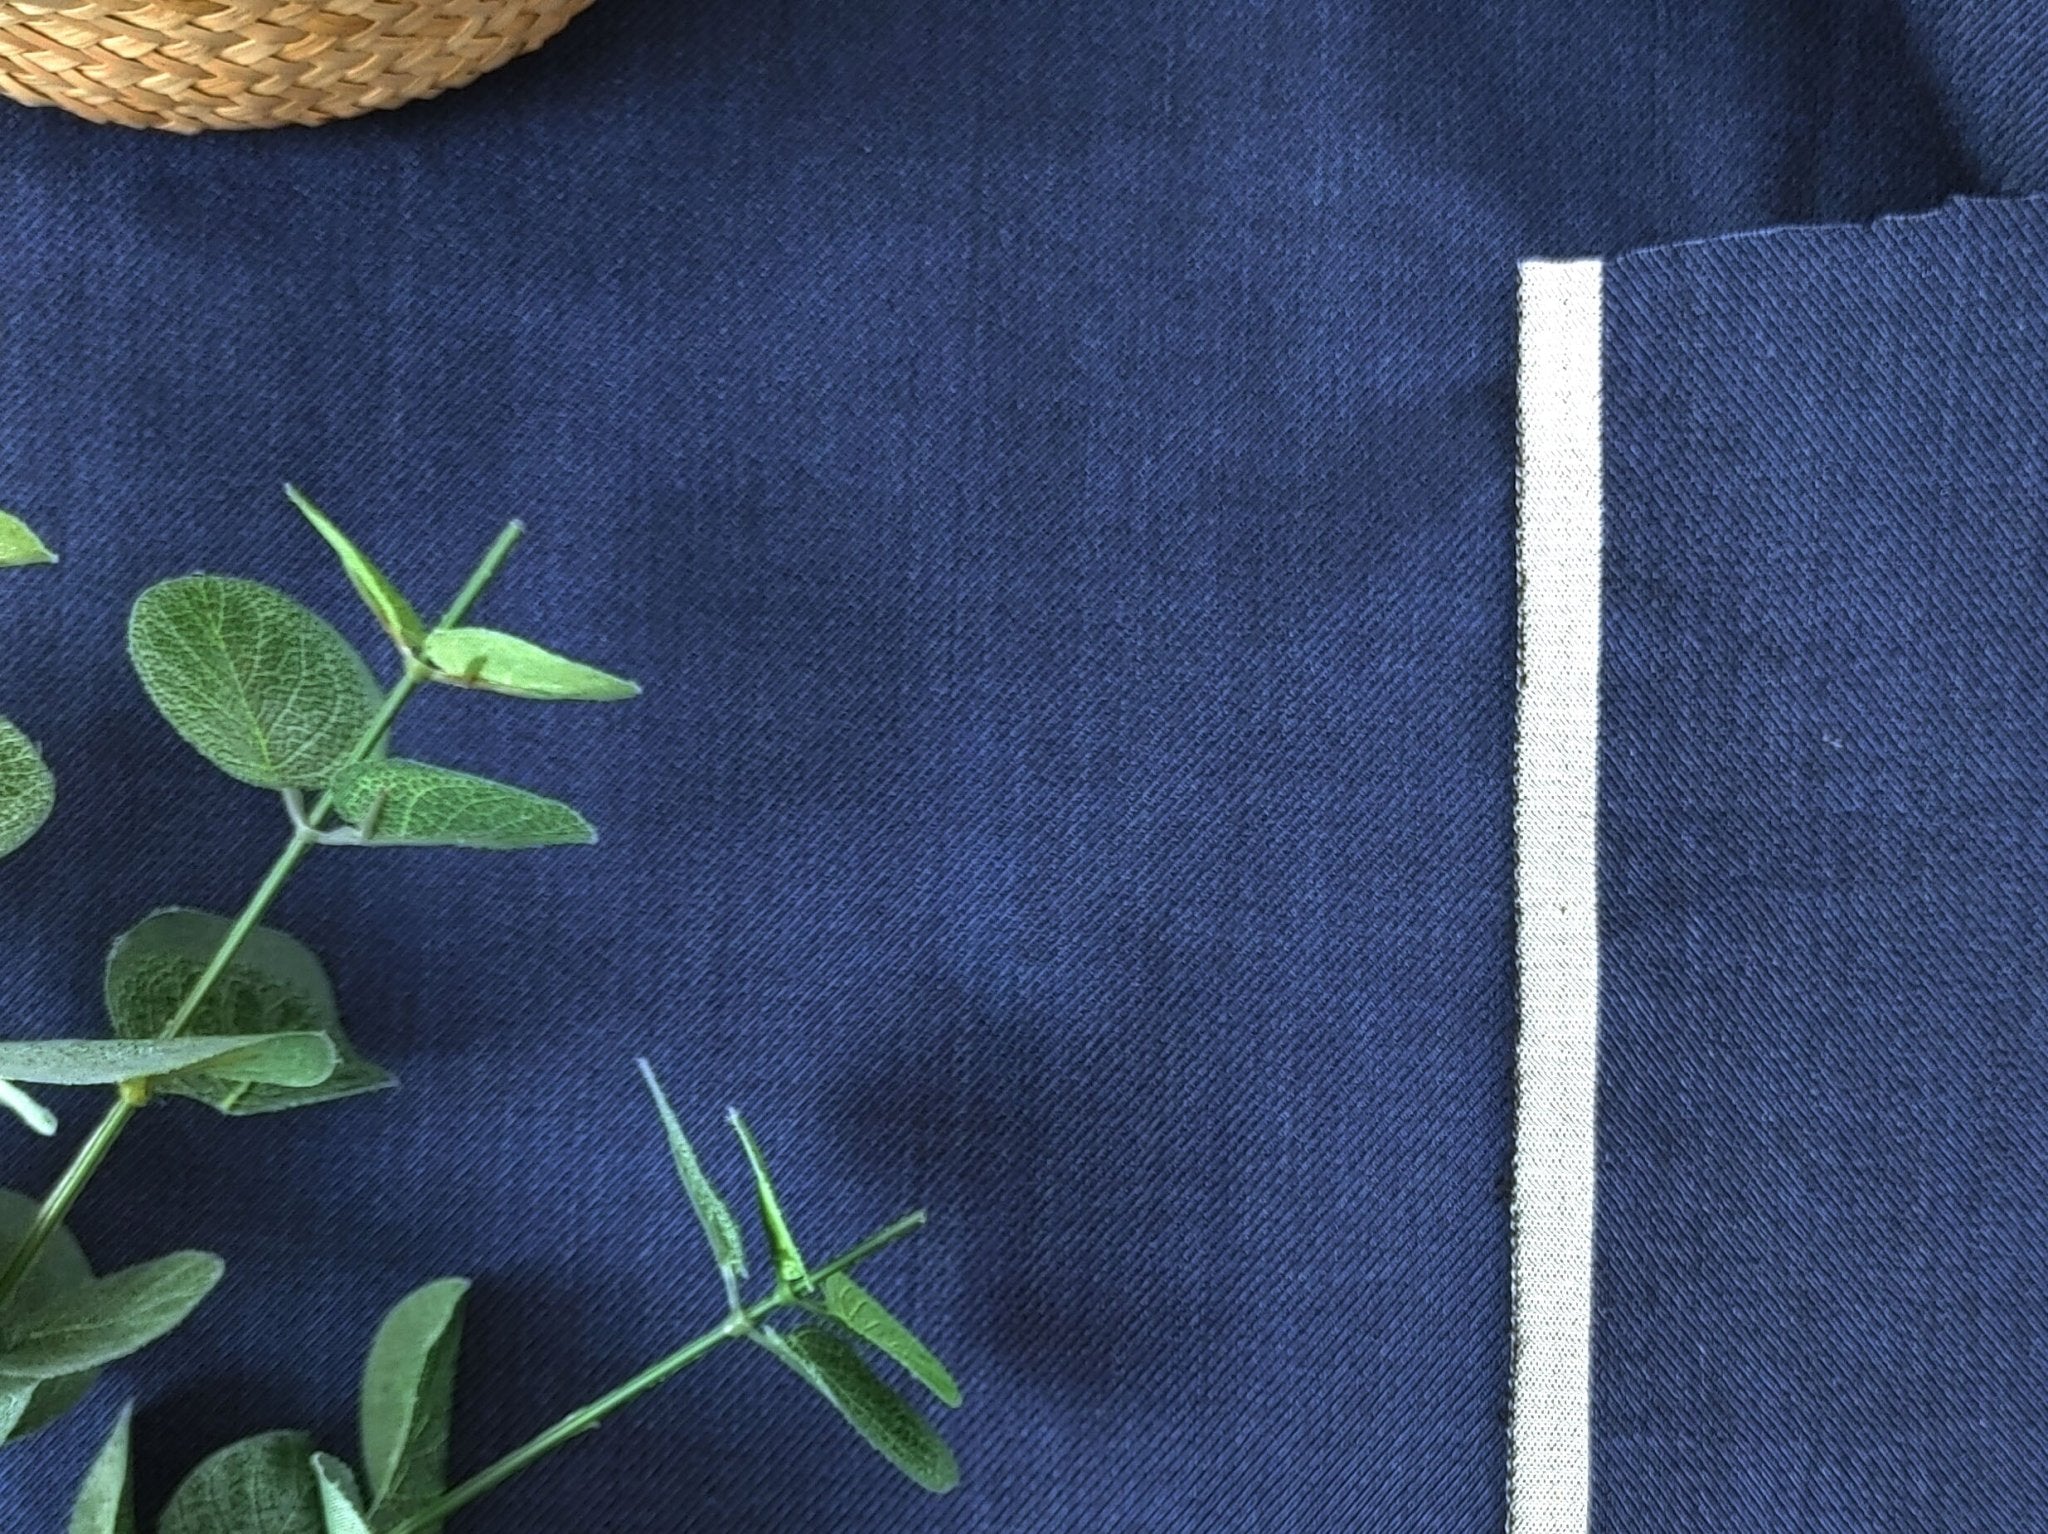 Linen Cotton Stretch Twill: Denim-Inspired Style Fabric 5988 - The Linen Lab - Navy